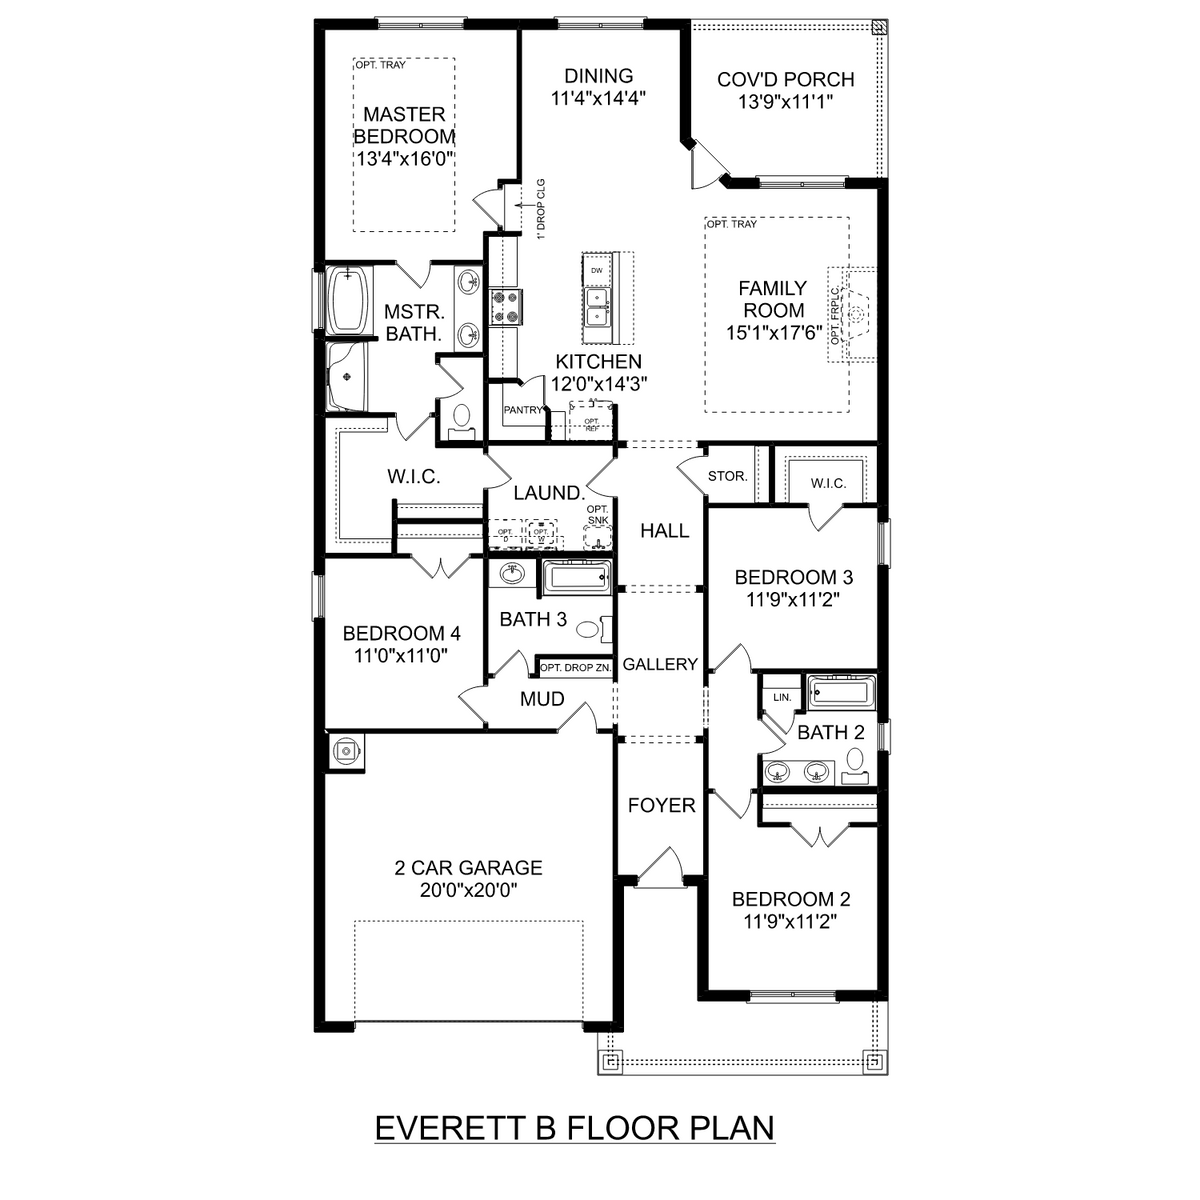 1 - The Everett B buildable floor plan layout in Davidson Homes' Spragins Cove community.